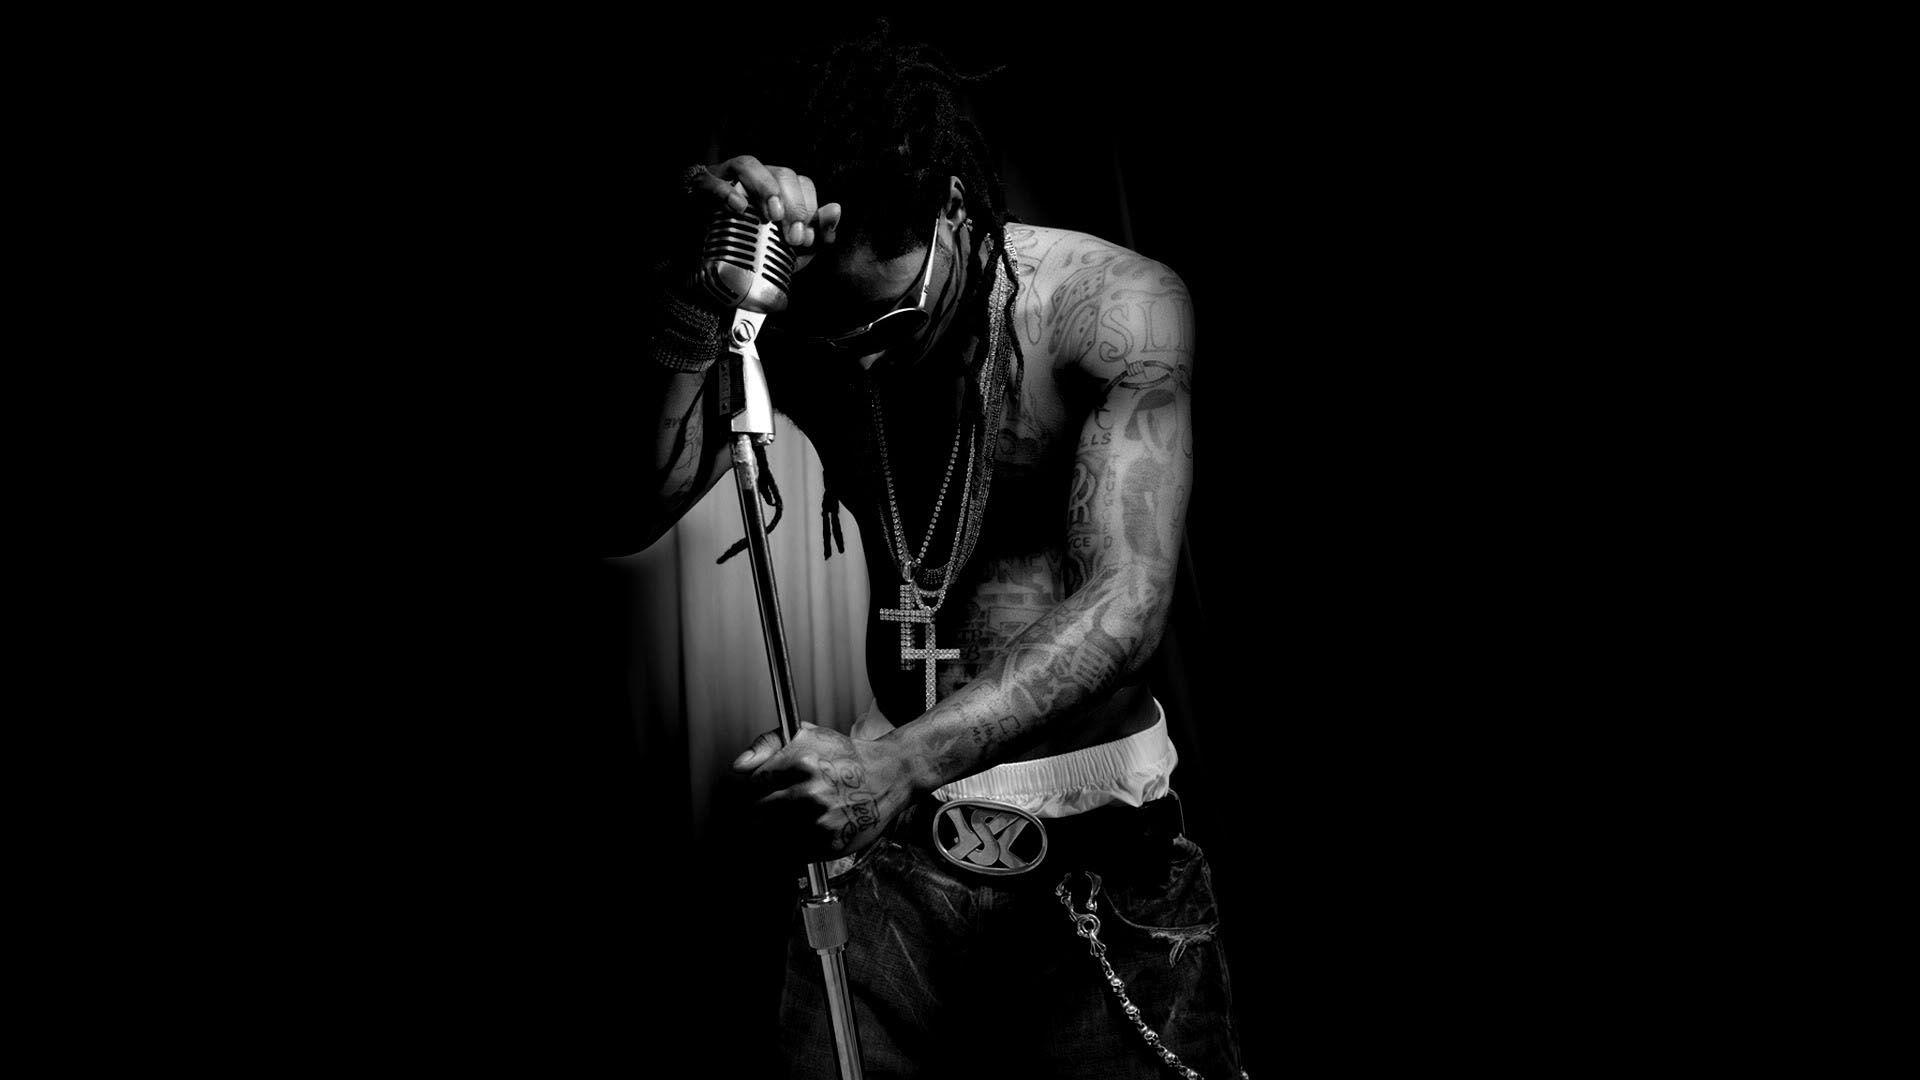 Lil Wayne Wallpapers High Resolution and Quality Download